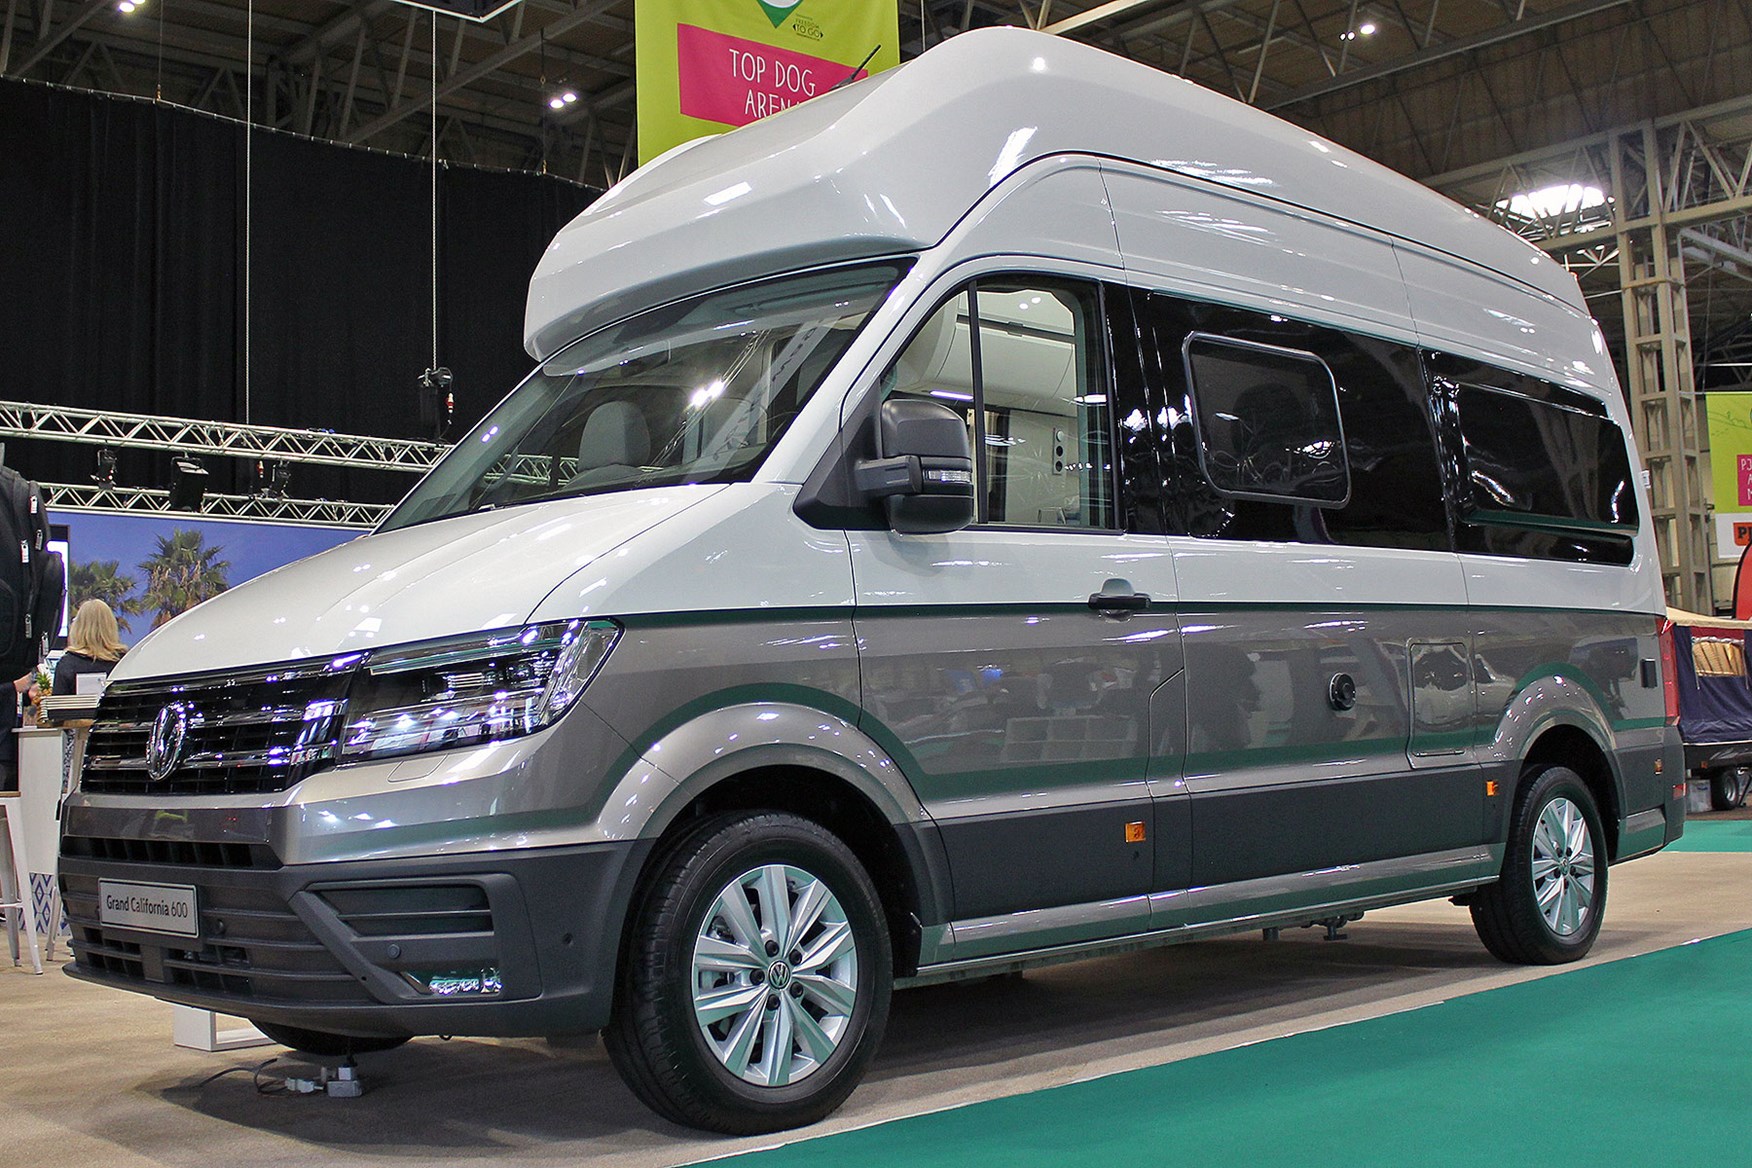 new vw crafter camper